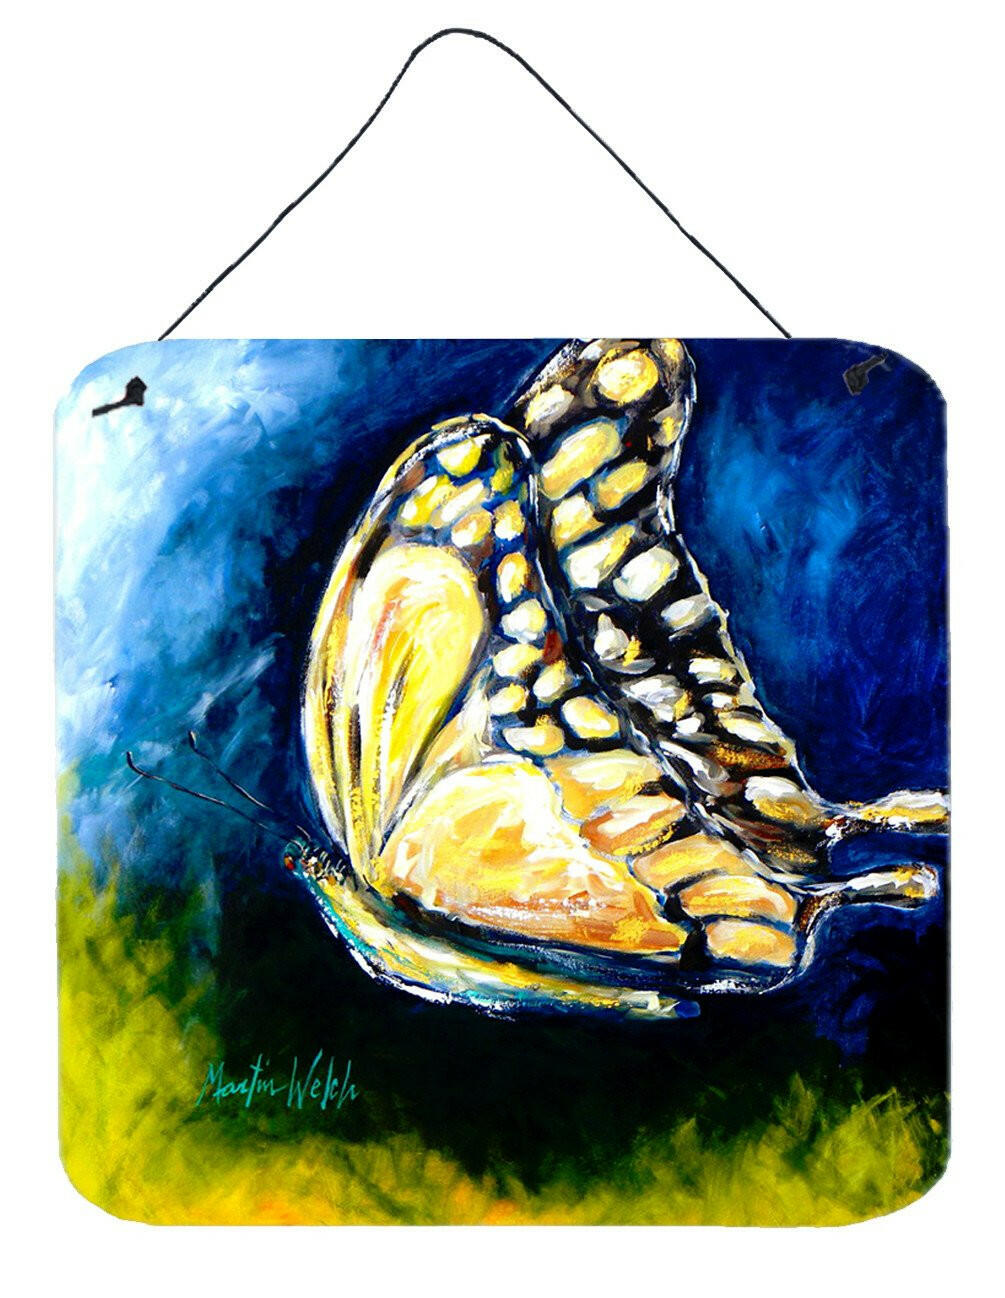 Insect - Butterly Forward Motion Aluminium Metal Wall or Door Hanging Prints by Caroline's Treasures